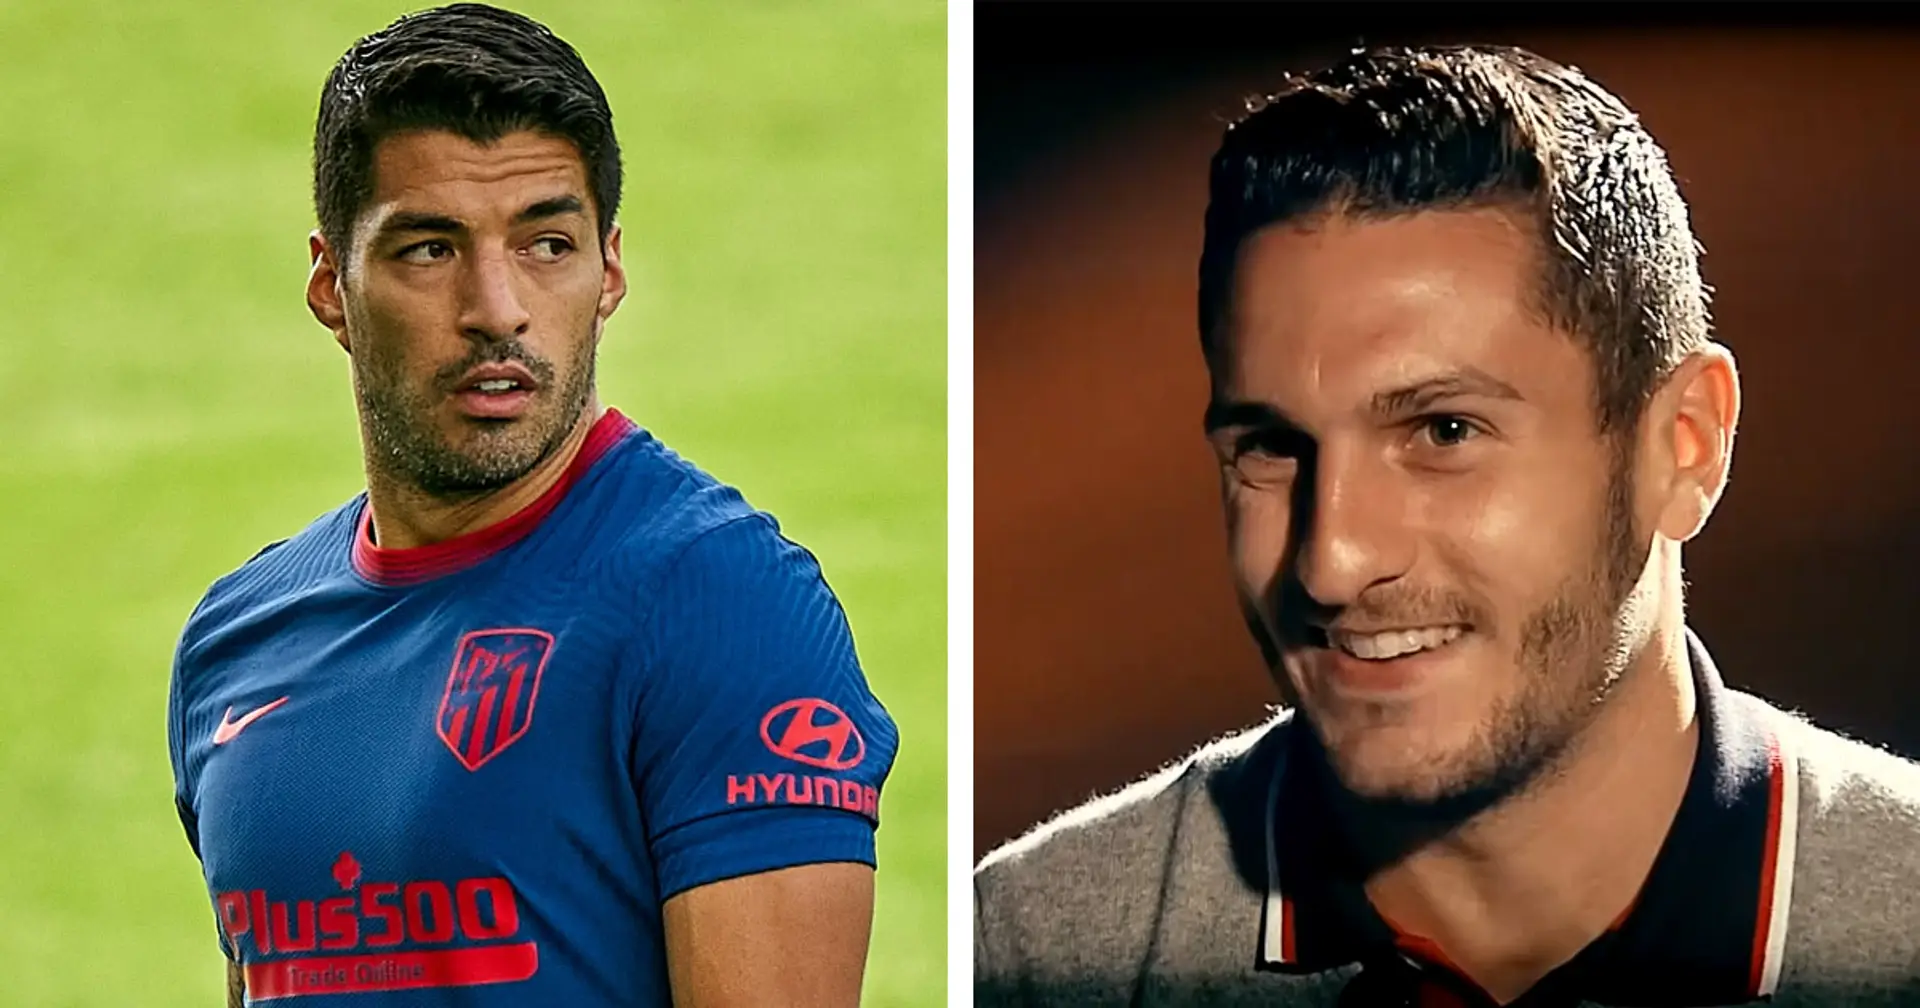 'He's fit us like a glove': Koke on Luis Suarez bringing 'radical change' to Atletico's play